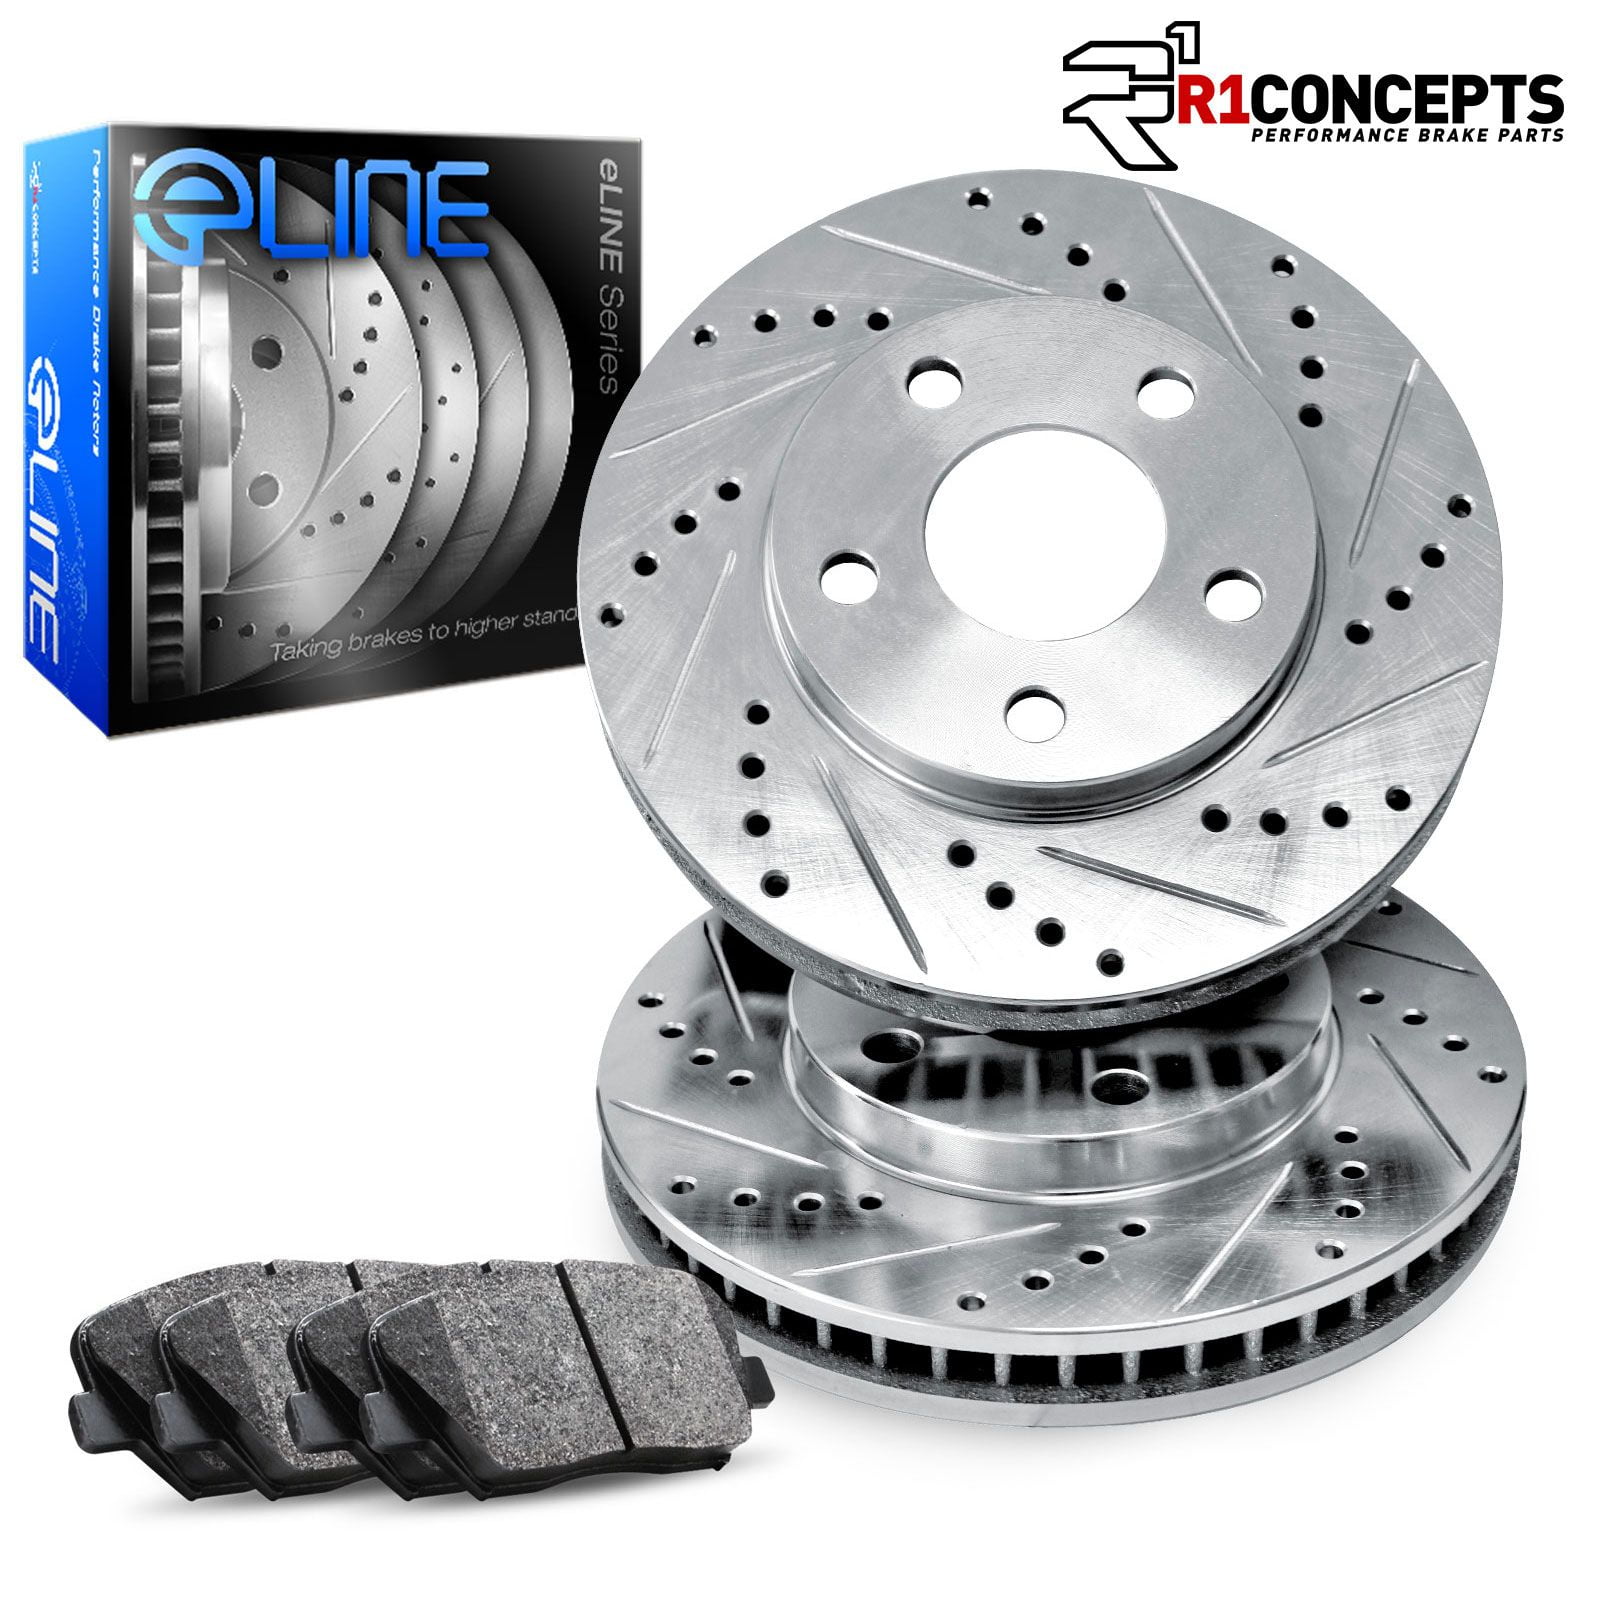 Used on Riding Mowers Pads Included Replaces Manco: 3759 Stens 260-109 Metal Disc Brake Assembly Mini Bikes and Go-Karts 